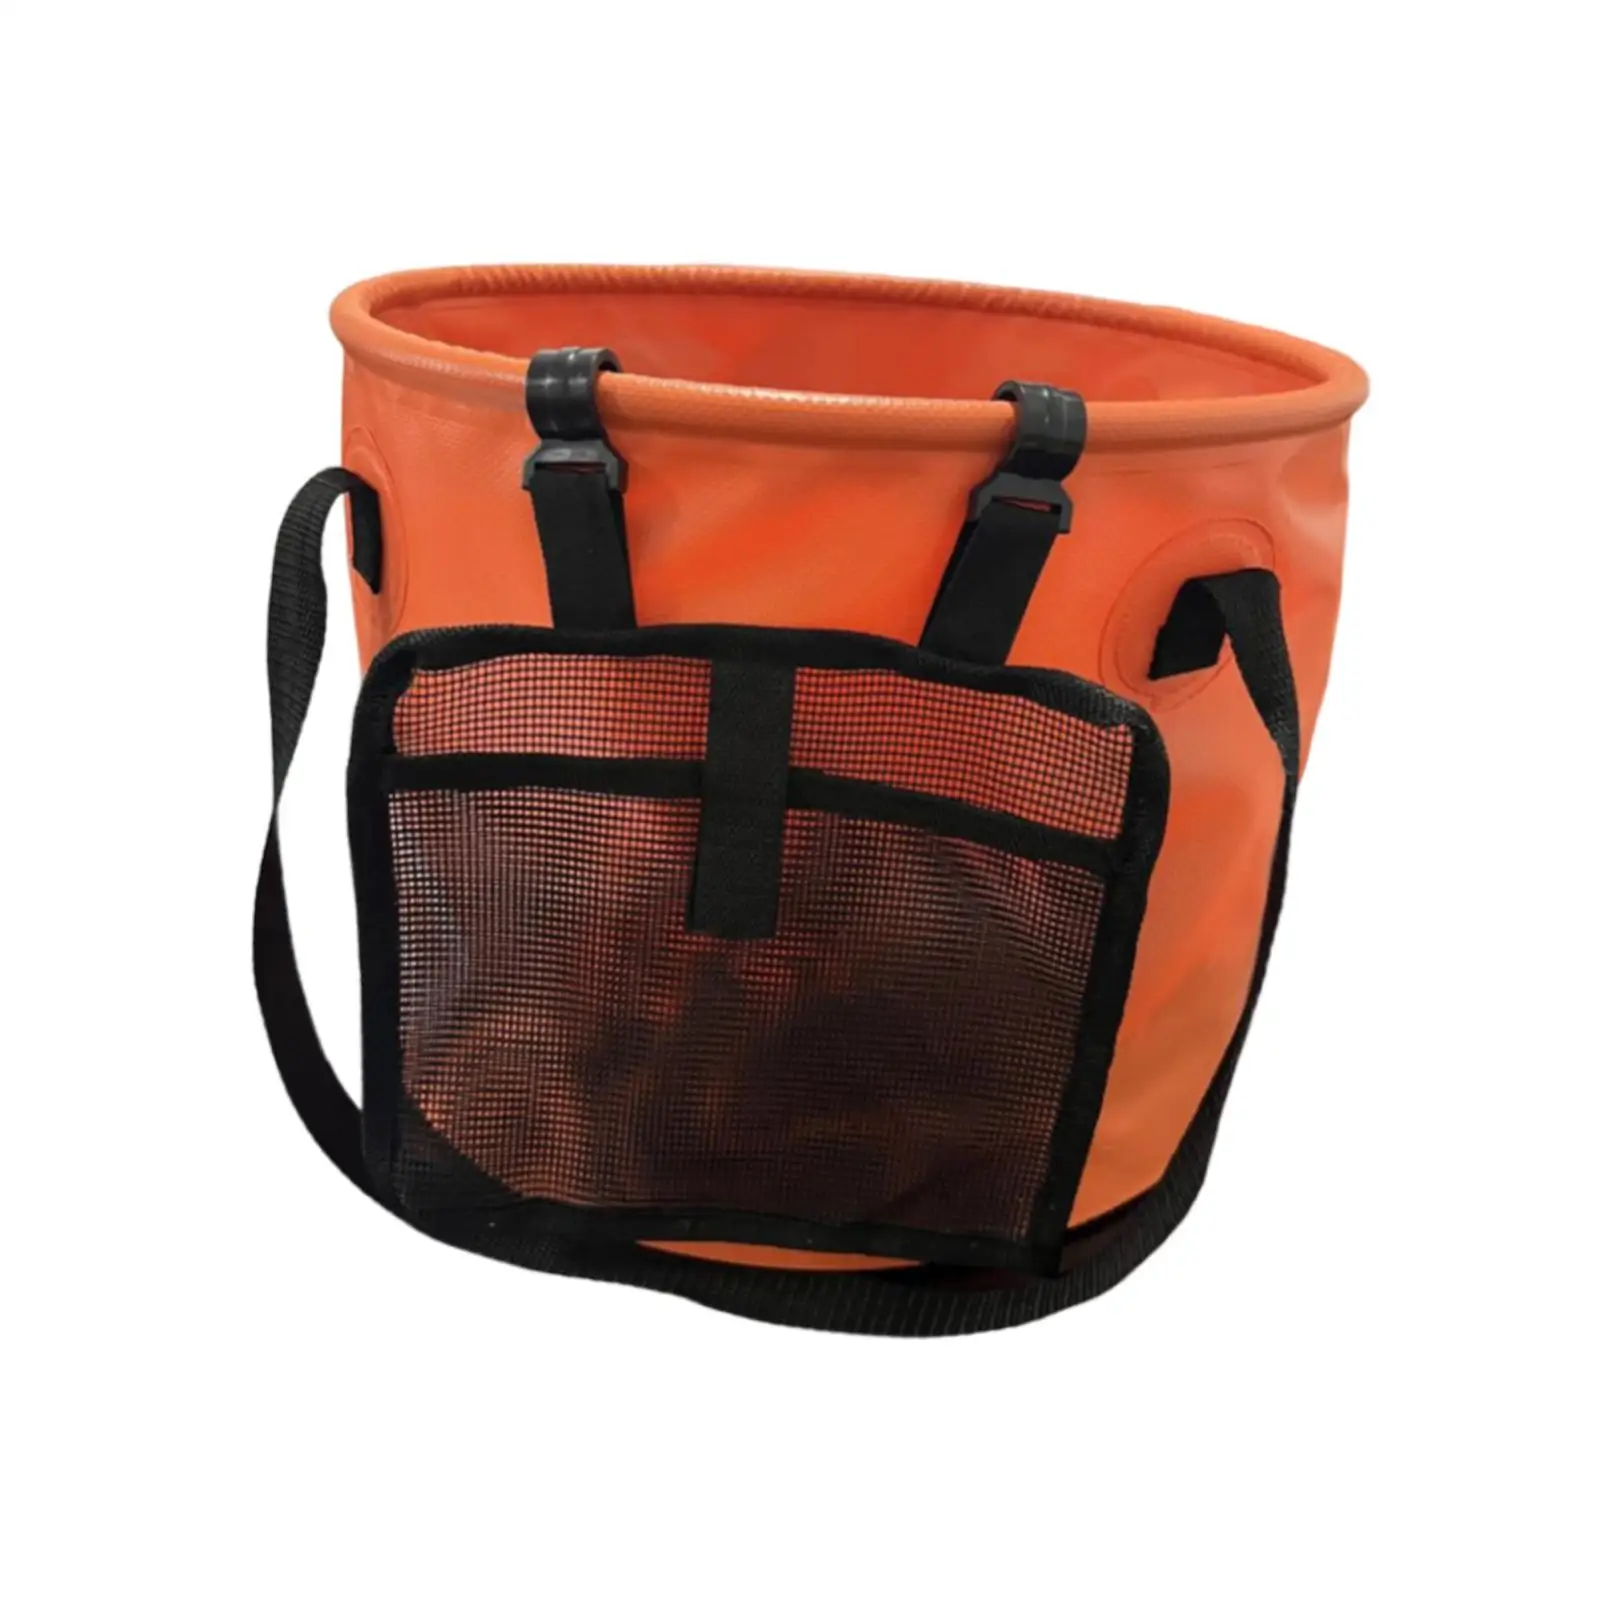 Collapsible Bucket Folding Portable Multifunctional 28L Folding Water Storage Bucket for Camping Travel Fishing Boating Outdoor